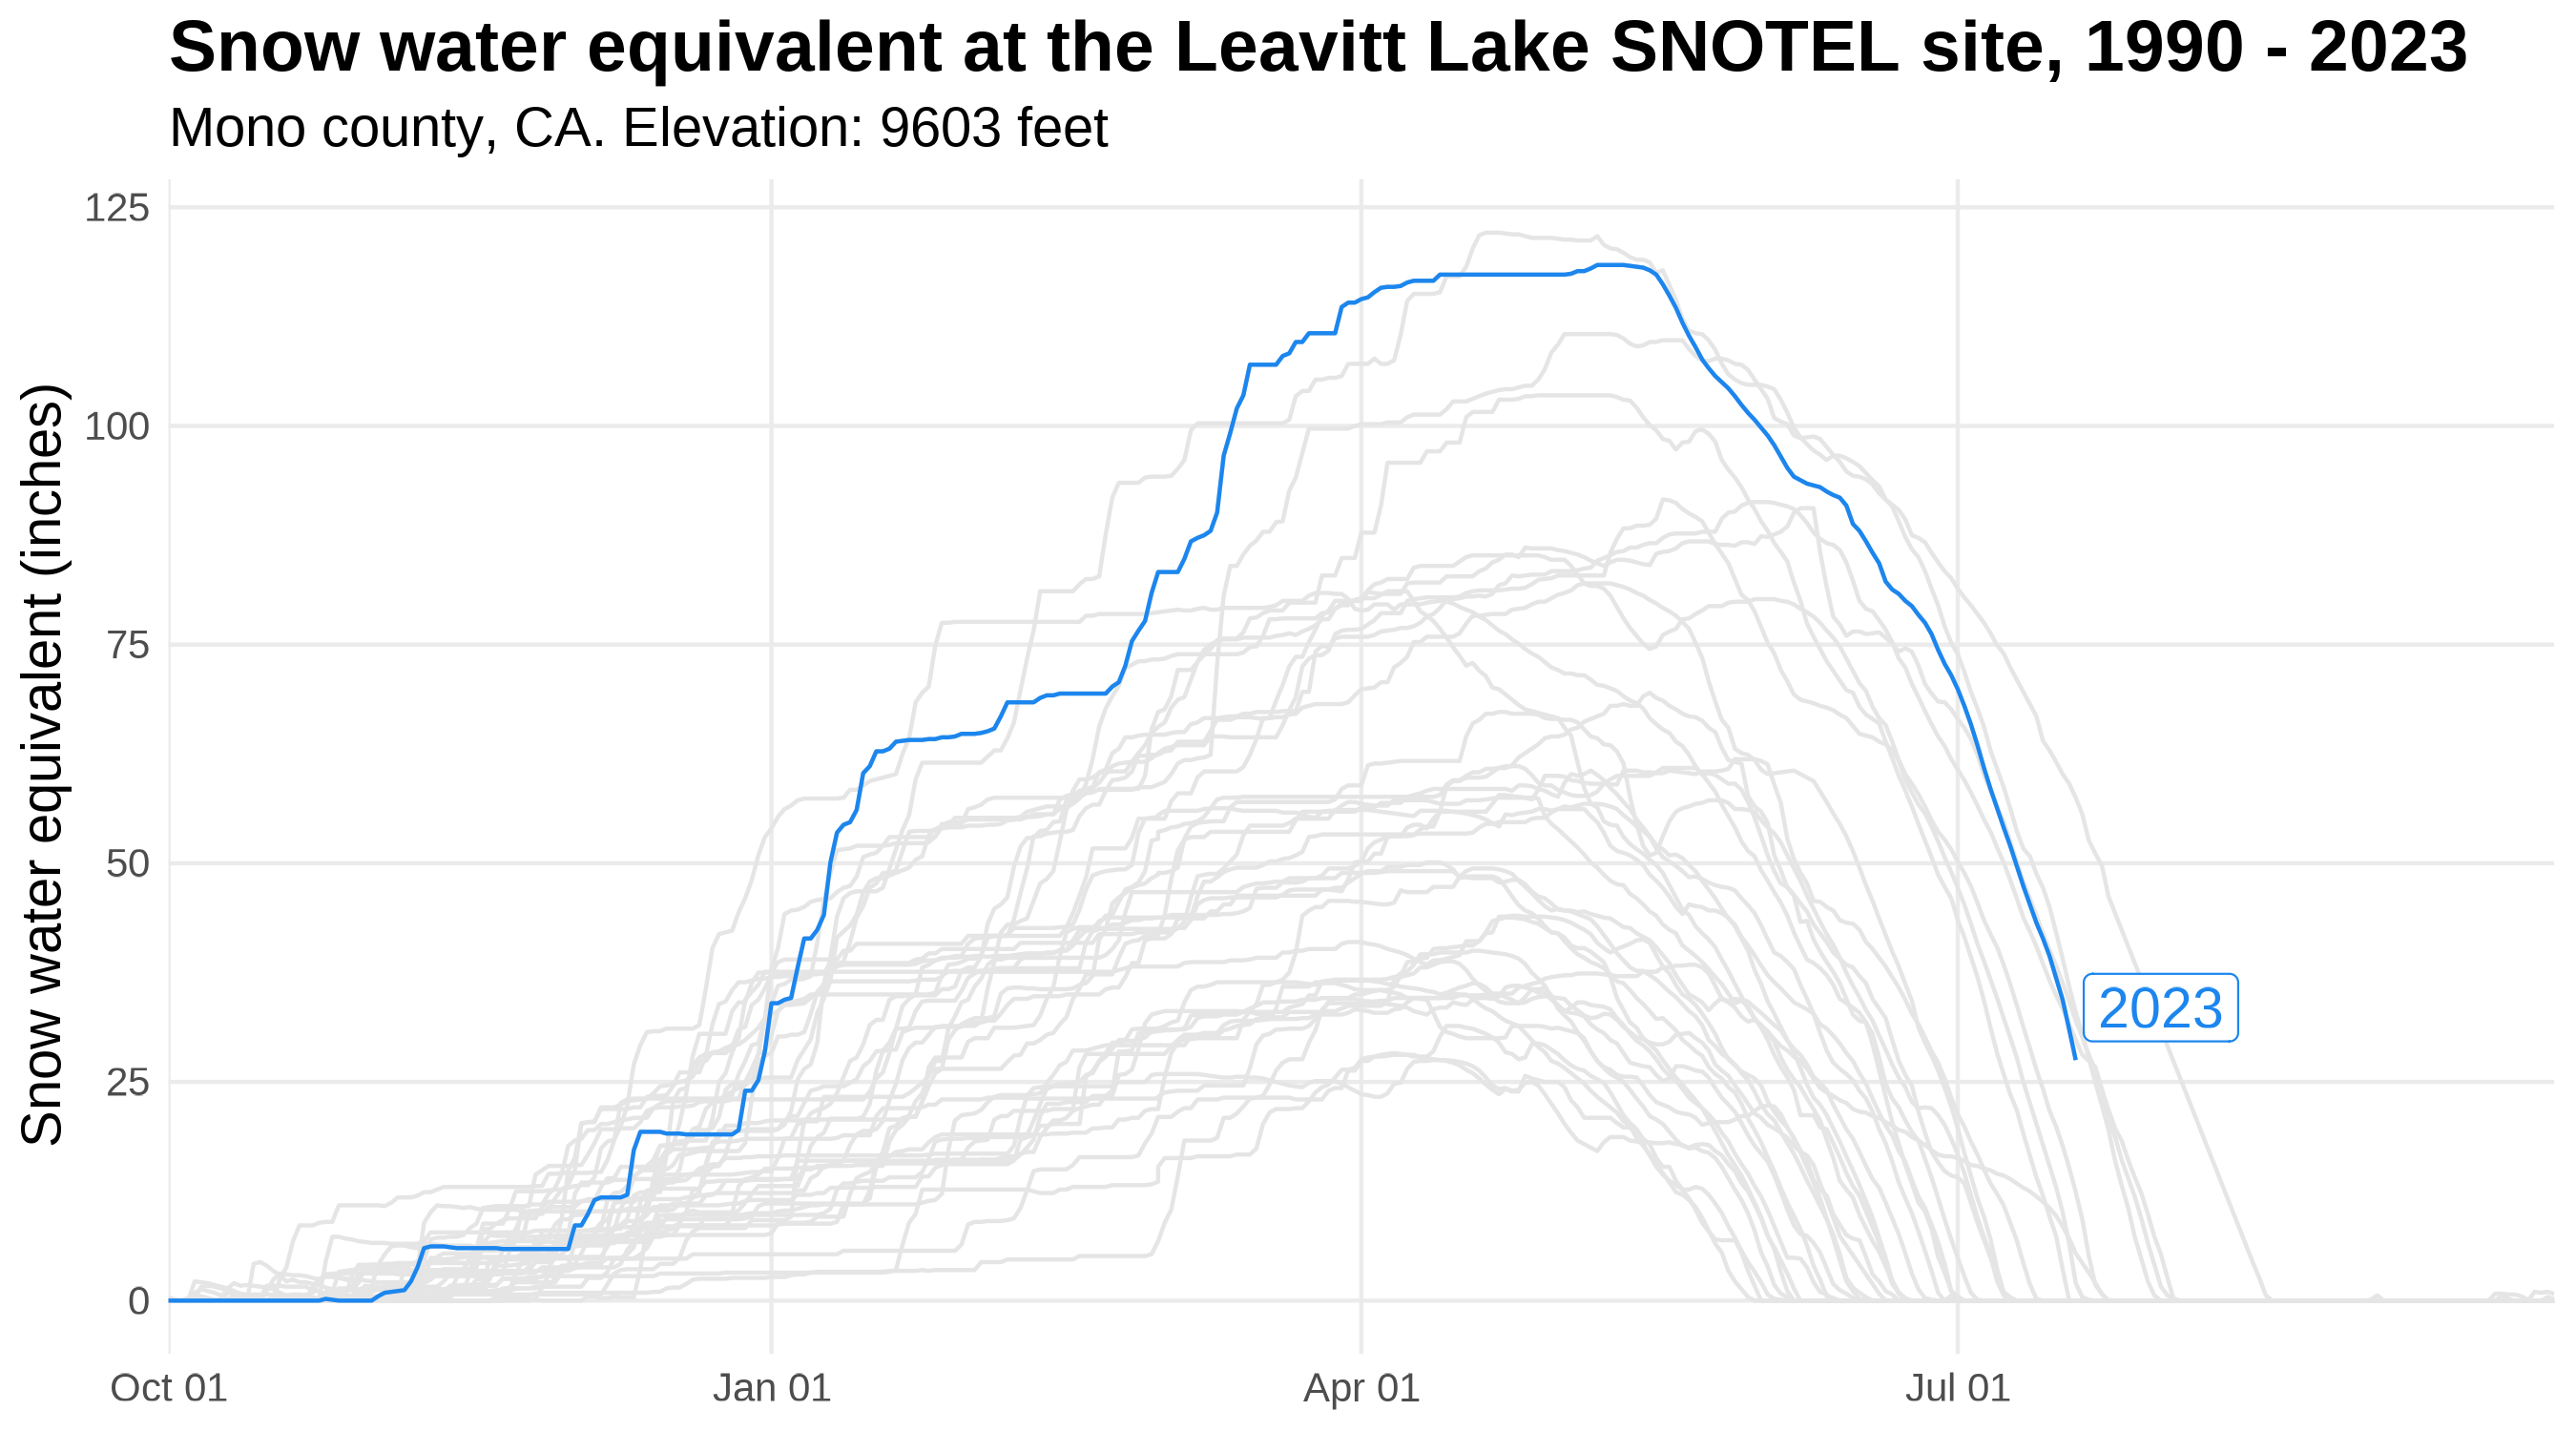 An highlighted line graph of 2023 snow water equivalent (SWE) at the Leavitt Lake SNOTEL site in Mono County, California, Elevation: 9603 feet. Highlighted blue line is  showing 2023 SWE from October 1 to September 31 with grey lines showing SWE from 1990-2023.